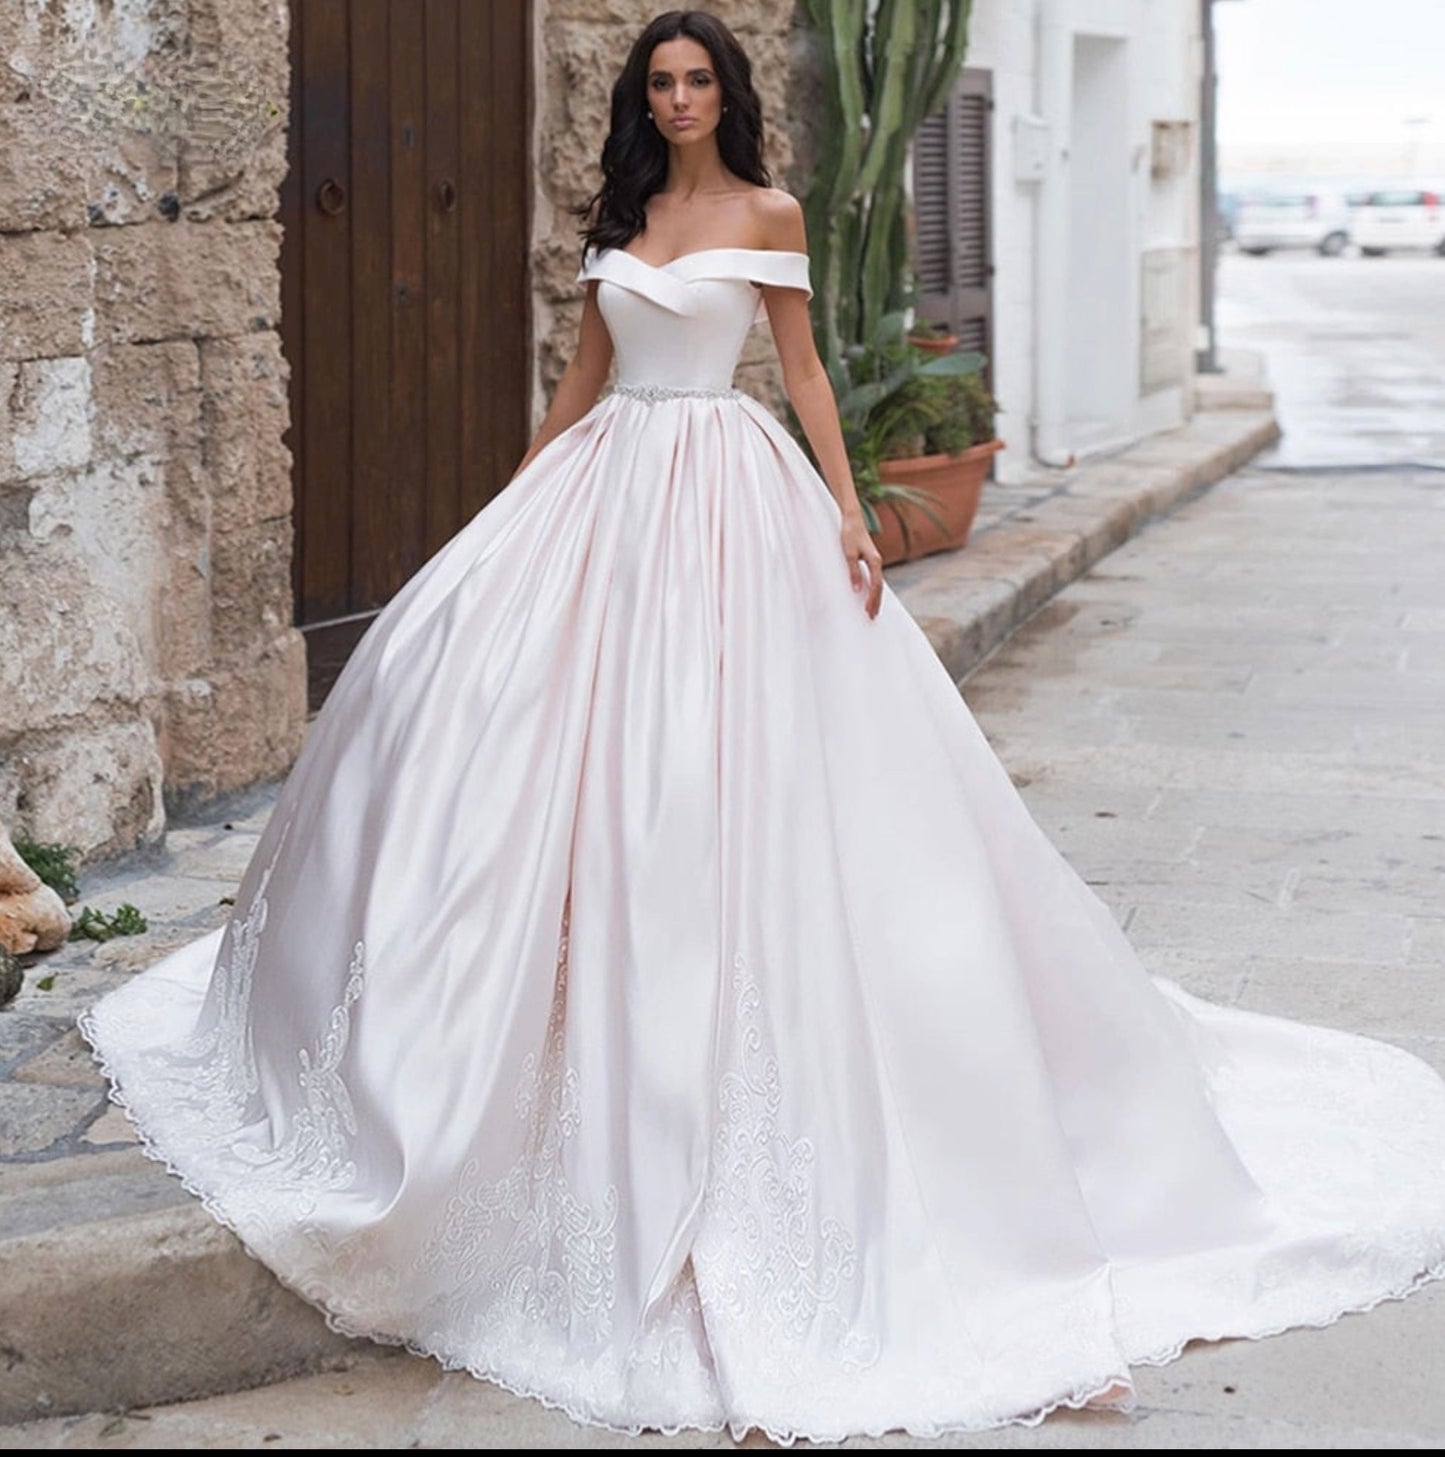 Boat Neck Matte Satin Princess Wedding Dress Bridal Gown – TulleLux Bridal  Crowns & Accessories